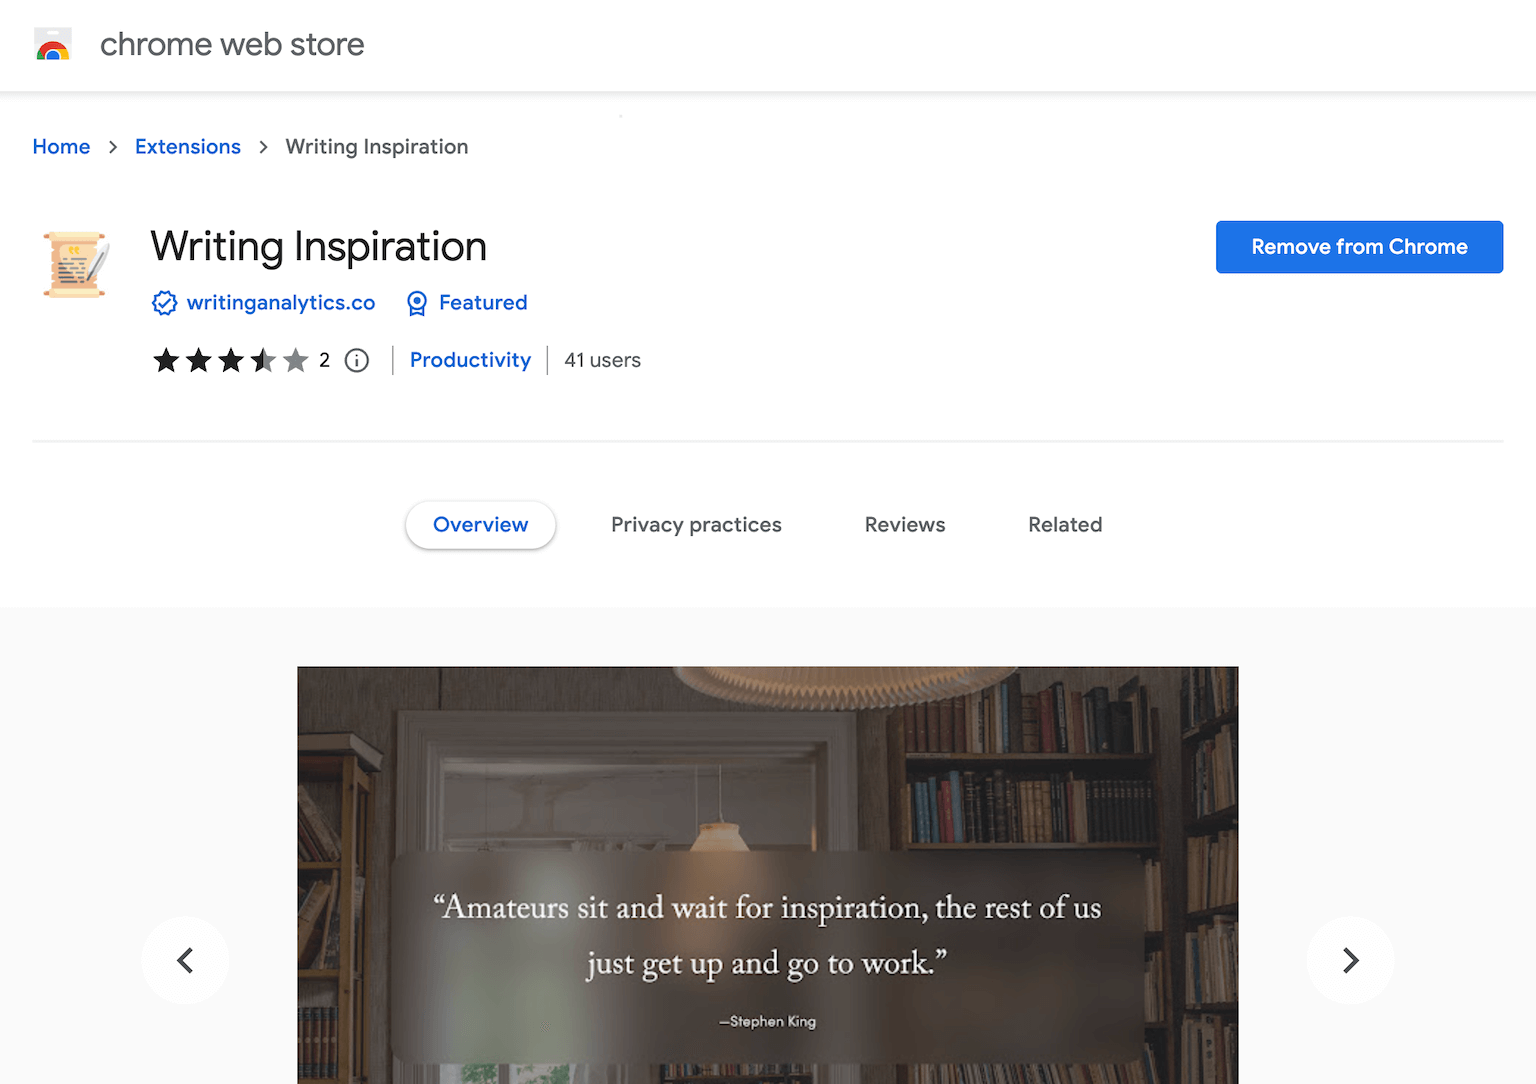 The Writing Inspiration extension in the Chrome Web Store